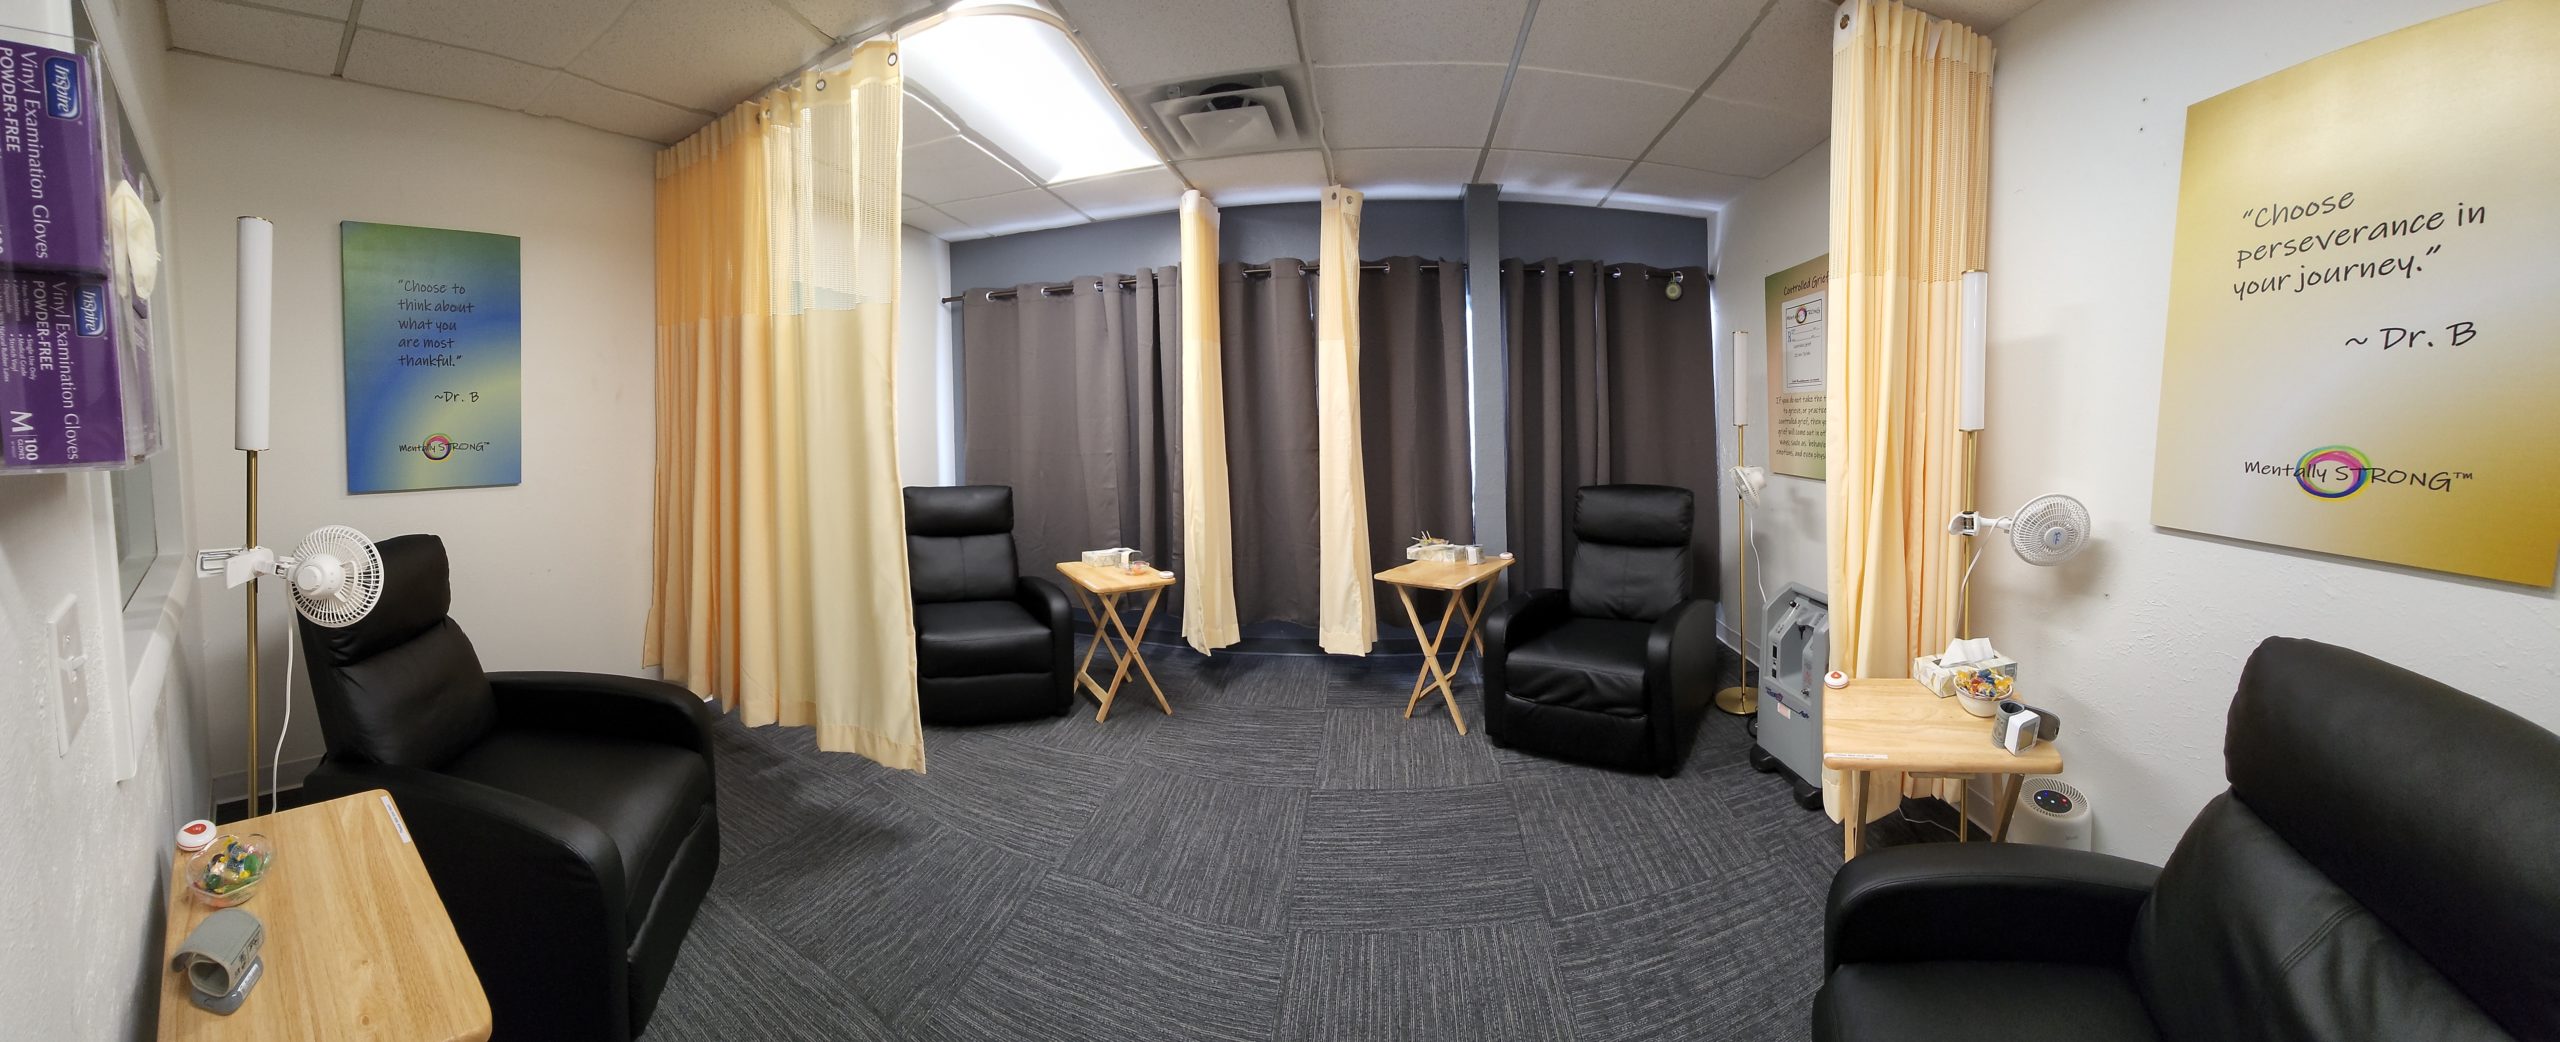 Ketamine treatment room at the Mentally STRONG Clinic